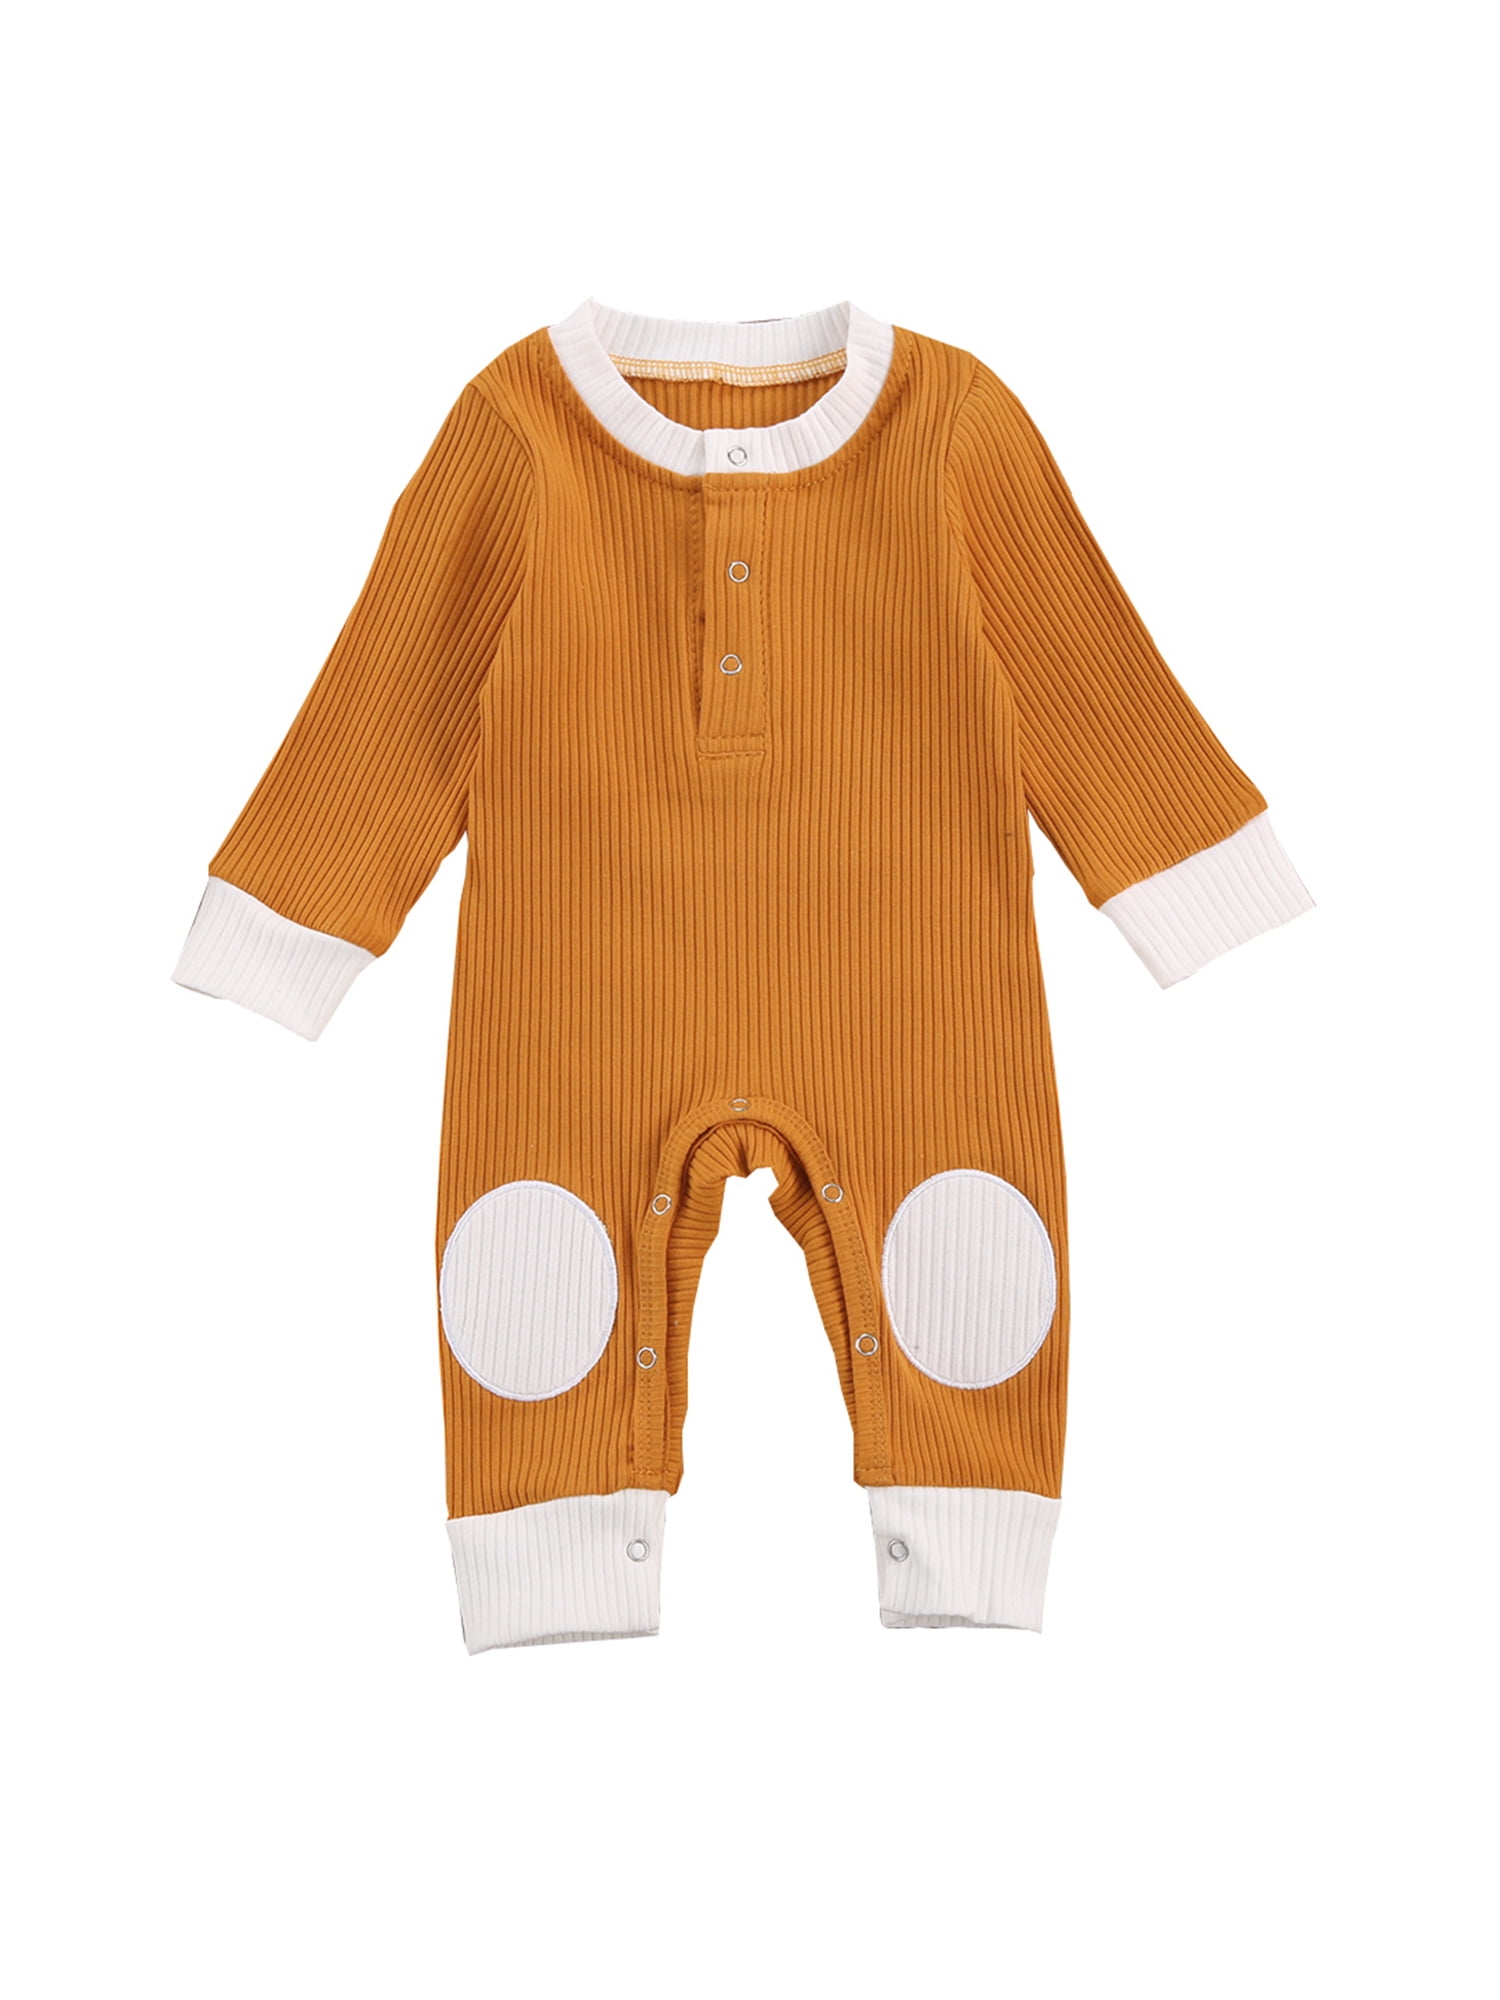 Spring hue Infant Baby Boy Girl Solid Sleeve Romper Jumpsuit One Piece Outfit Bodysuit Knitted Clothes - Walmart.com